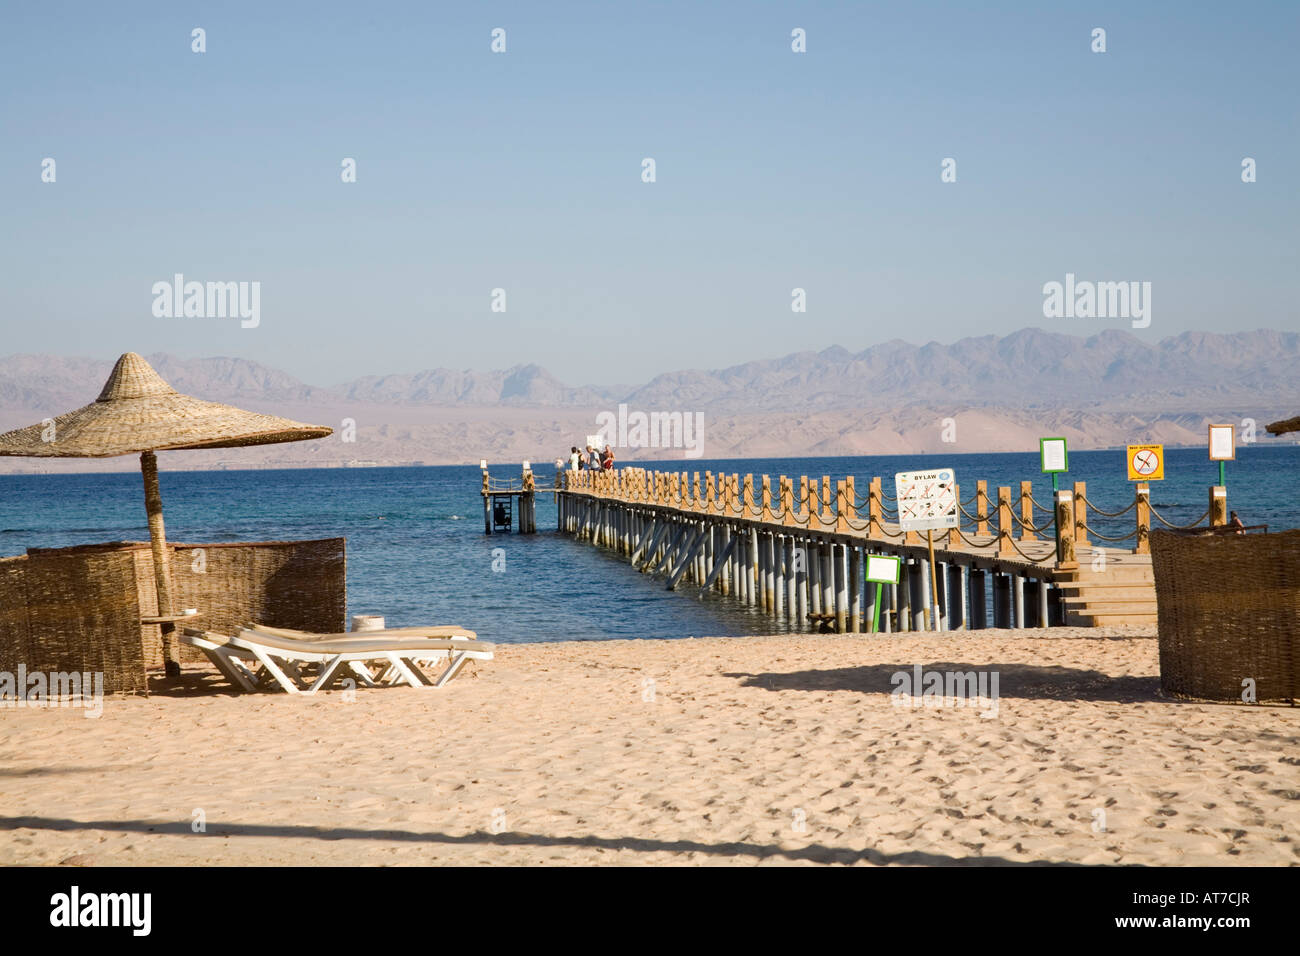 Taba Heights Sinai Egypt North Africa February Looking along a wooden ...